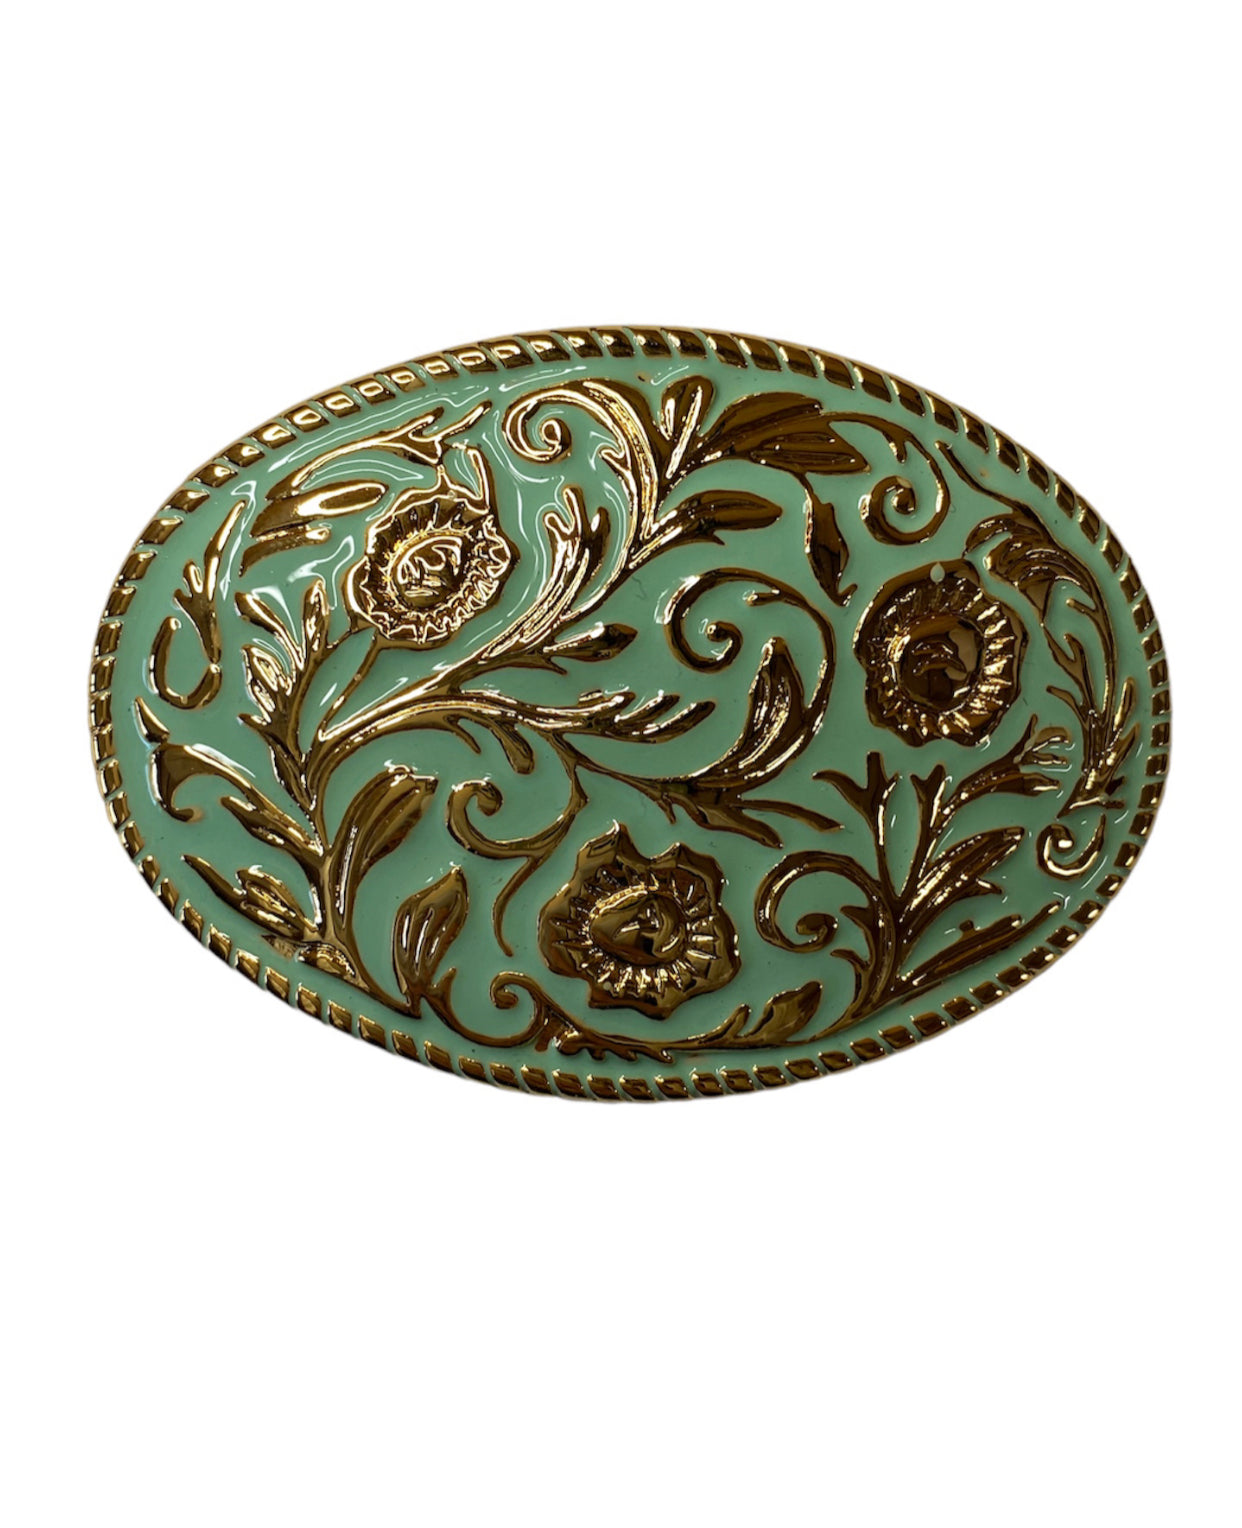 A8419 - Turquoise Floral Western Belt Buckle